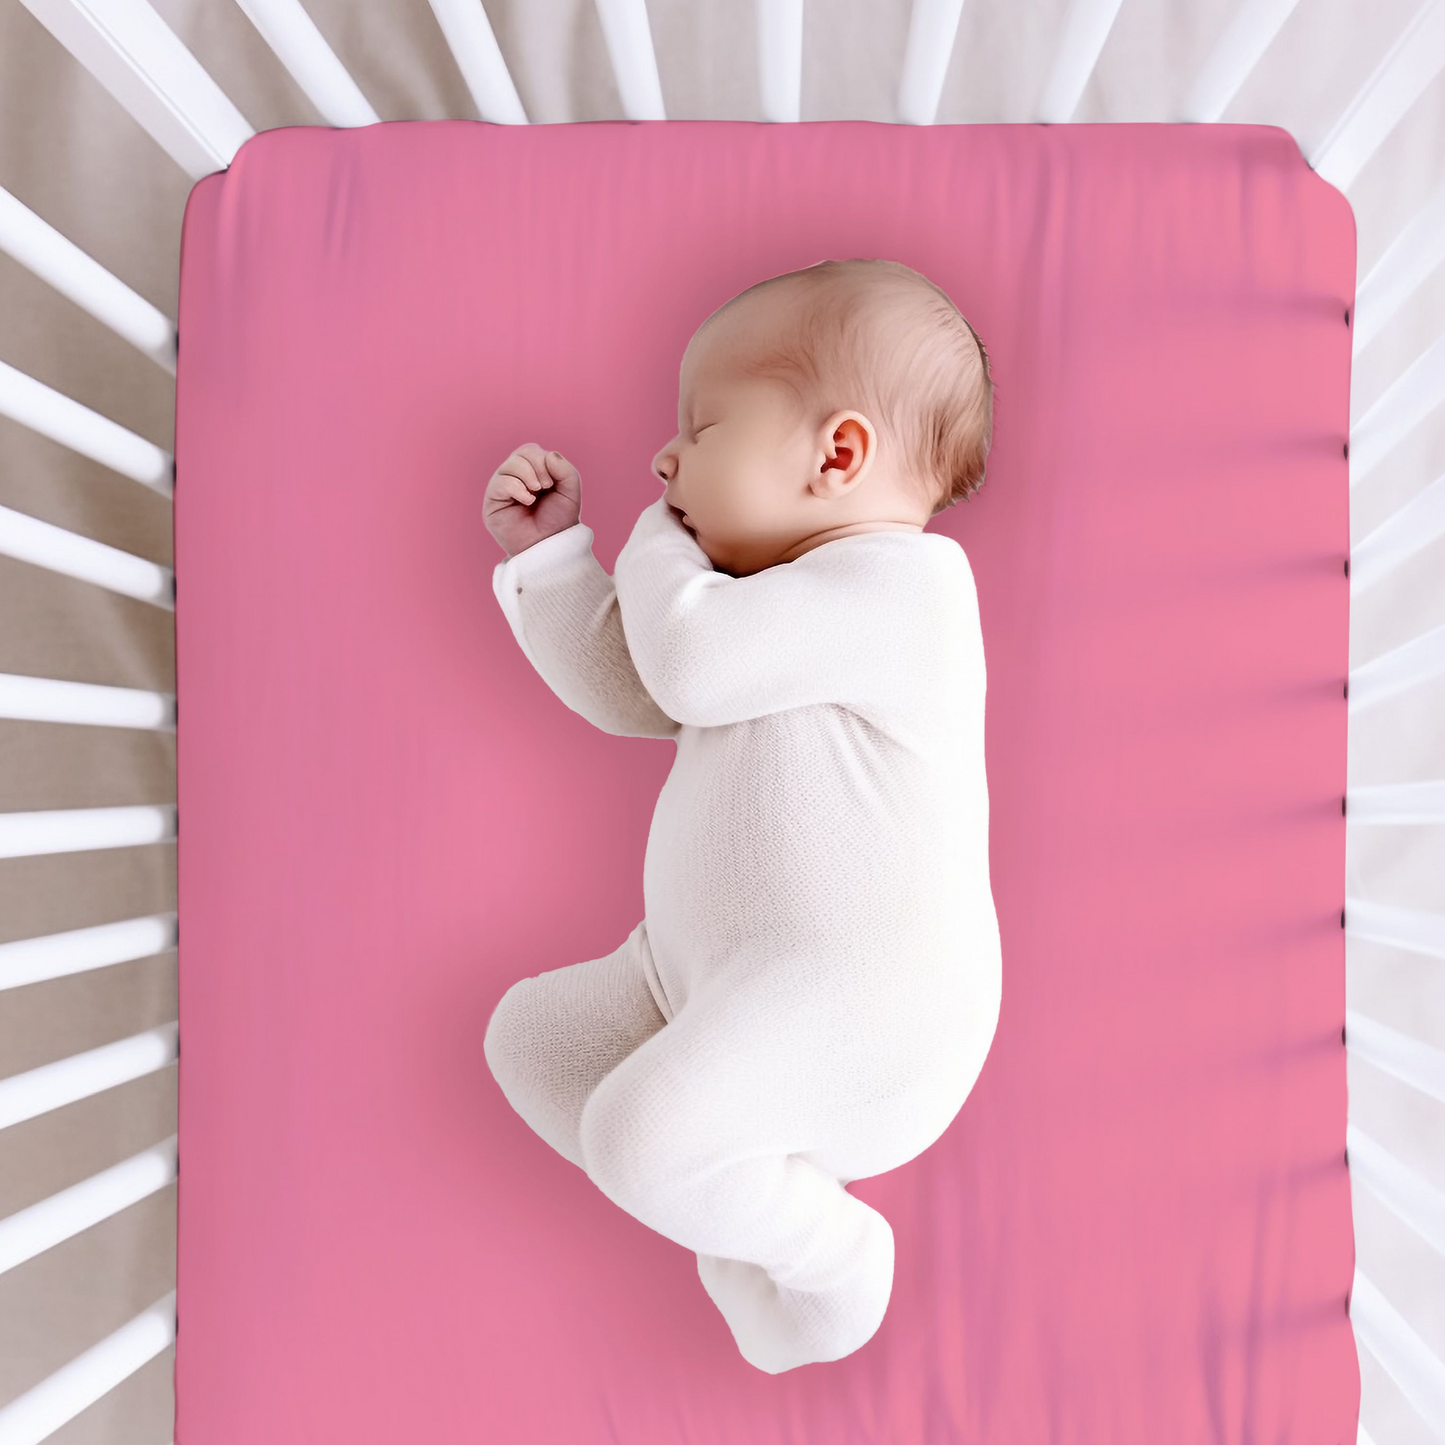 hot pink crib sheet shown with a baby in a crib.